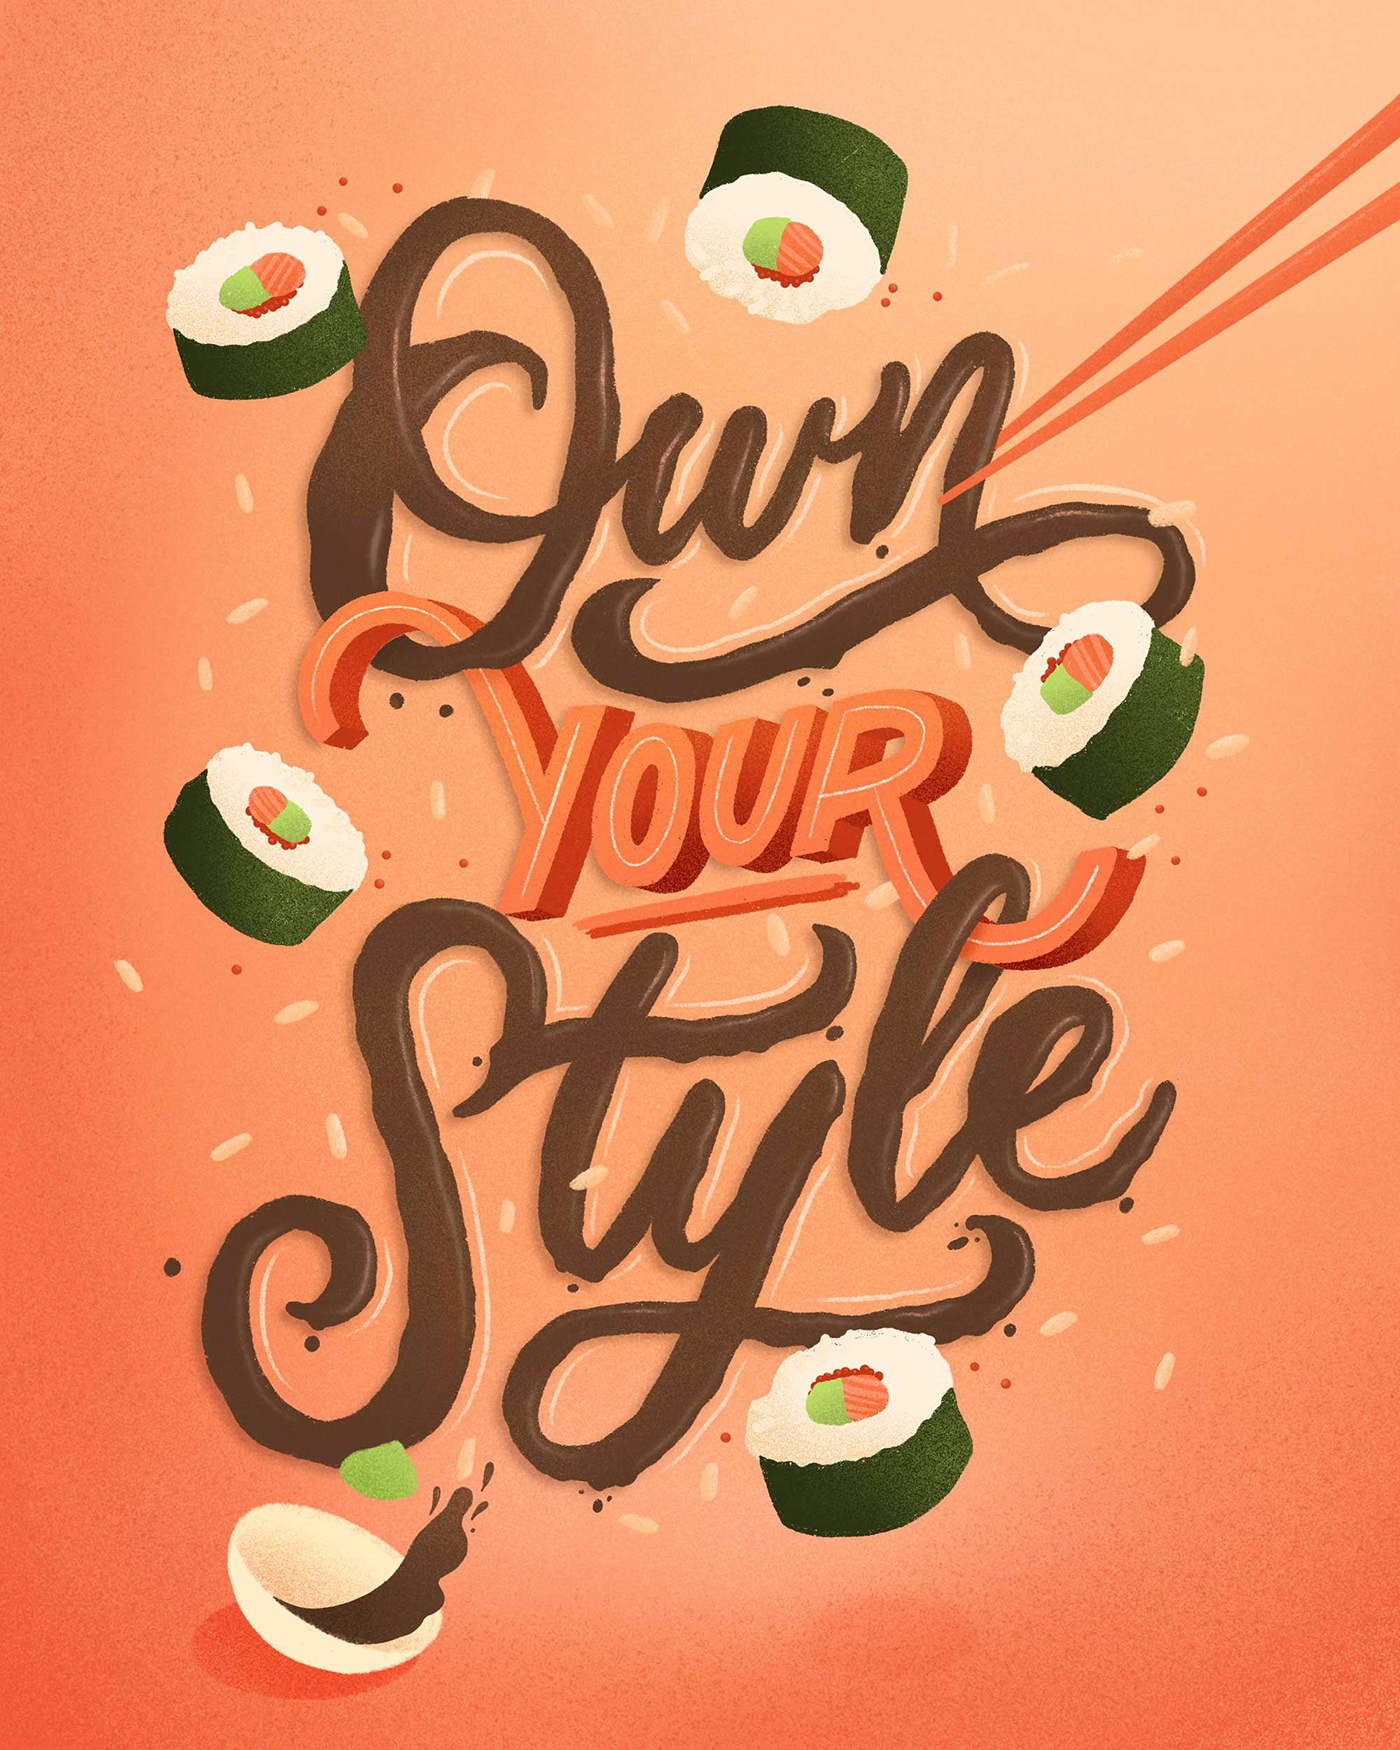 Hand lettering featuring the phrase "own your style" with food illustrations